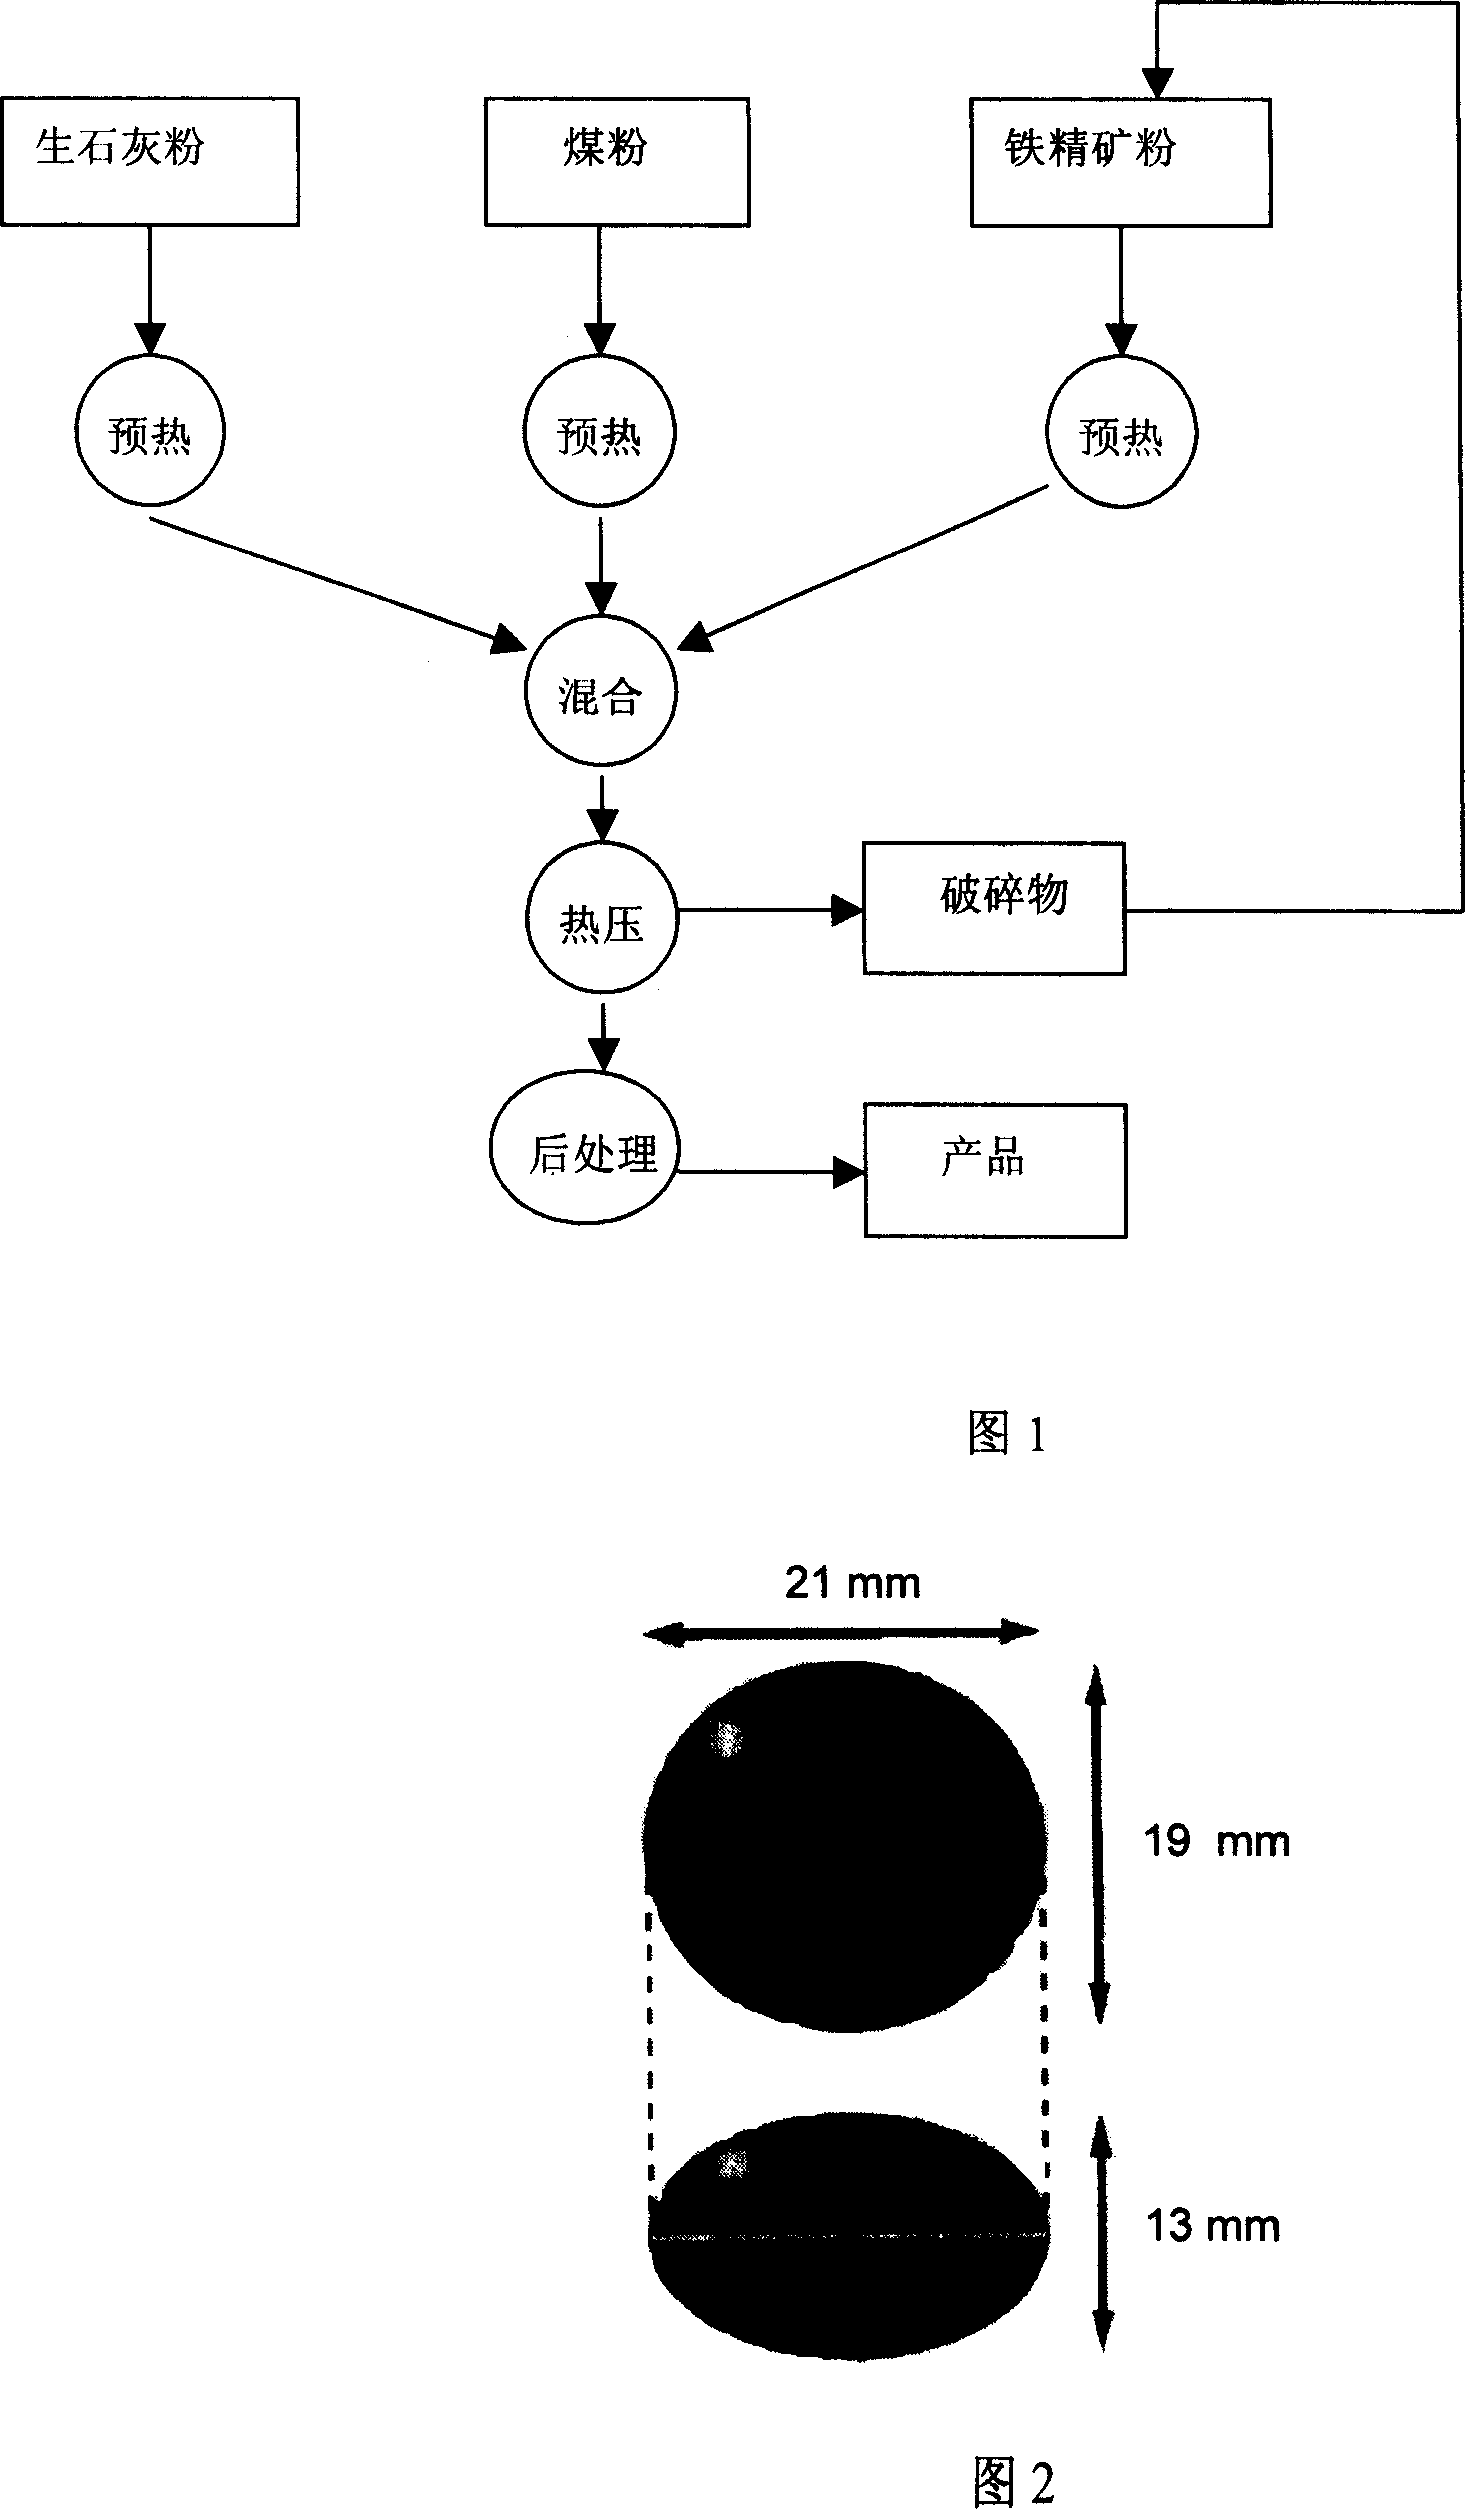 Method for preparing hot pressed balls of iron ore concentrate and powdered coal